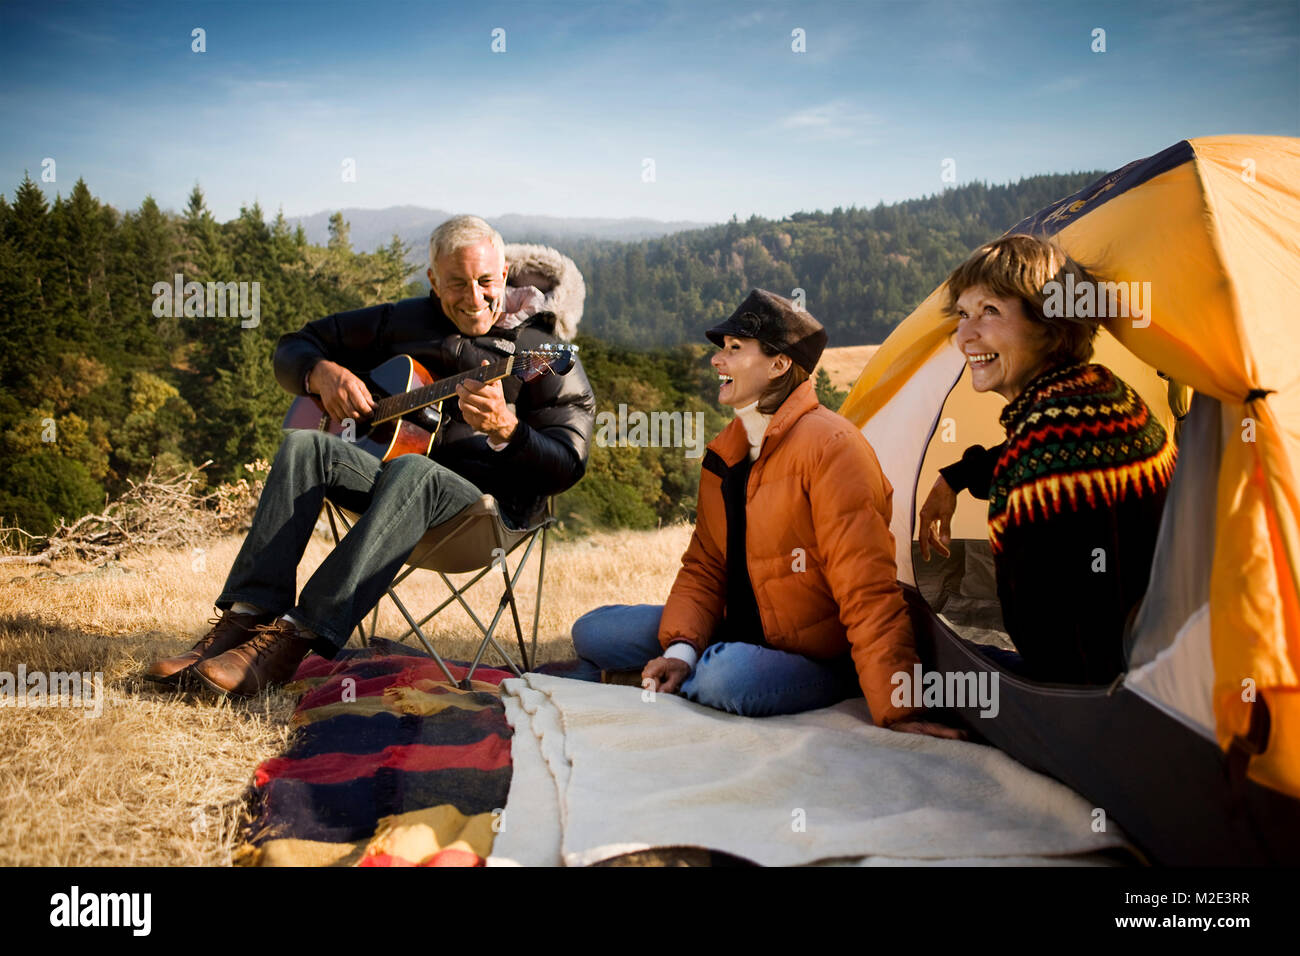 Women at camping tent listening to man playing guitar Stock Photo